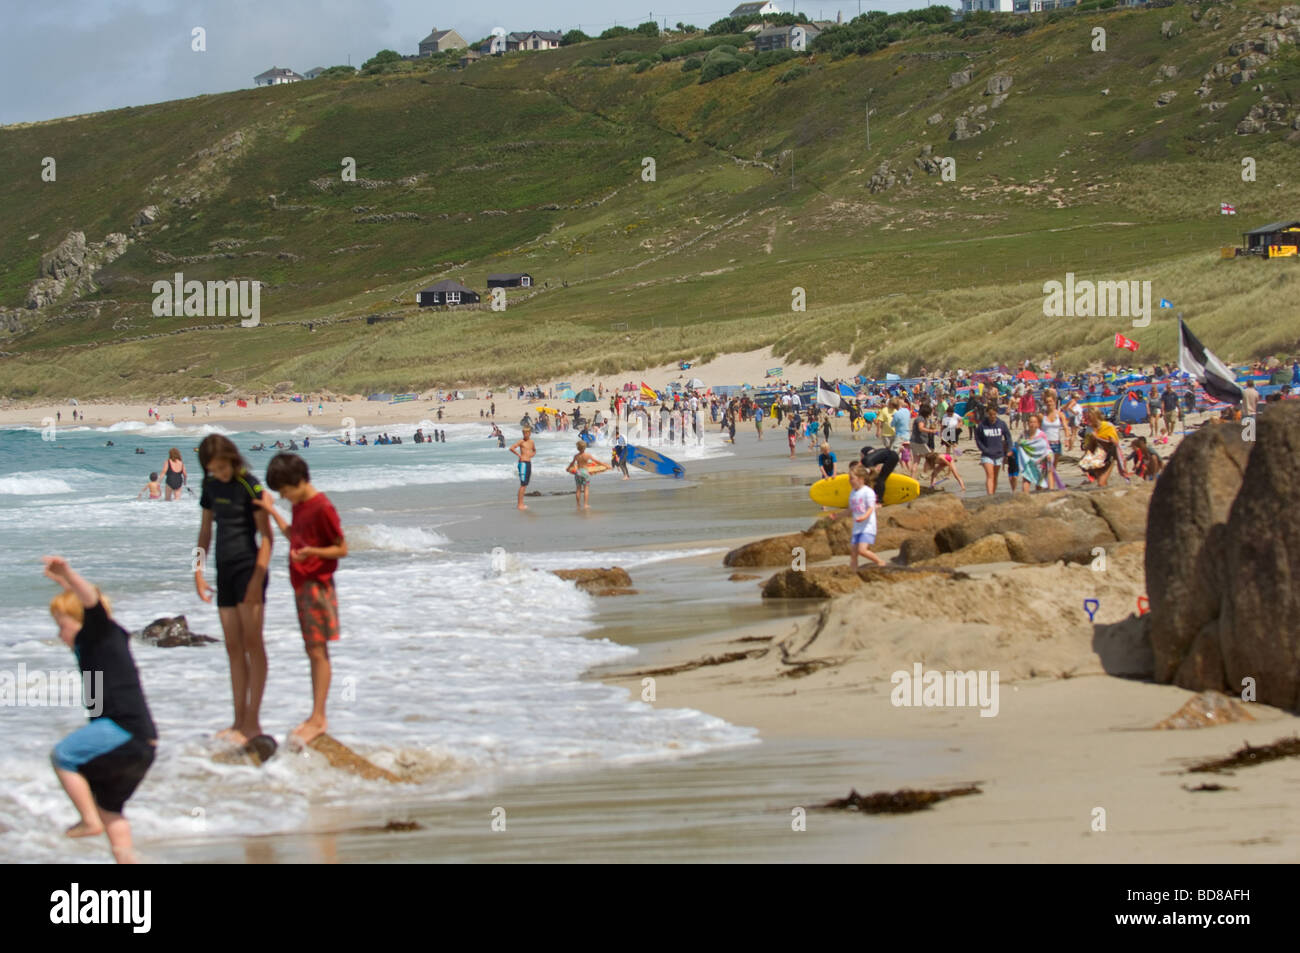 Crowd of bathers on Sennen Cove beach in Cornwall, UK Stock Photo